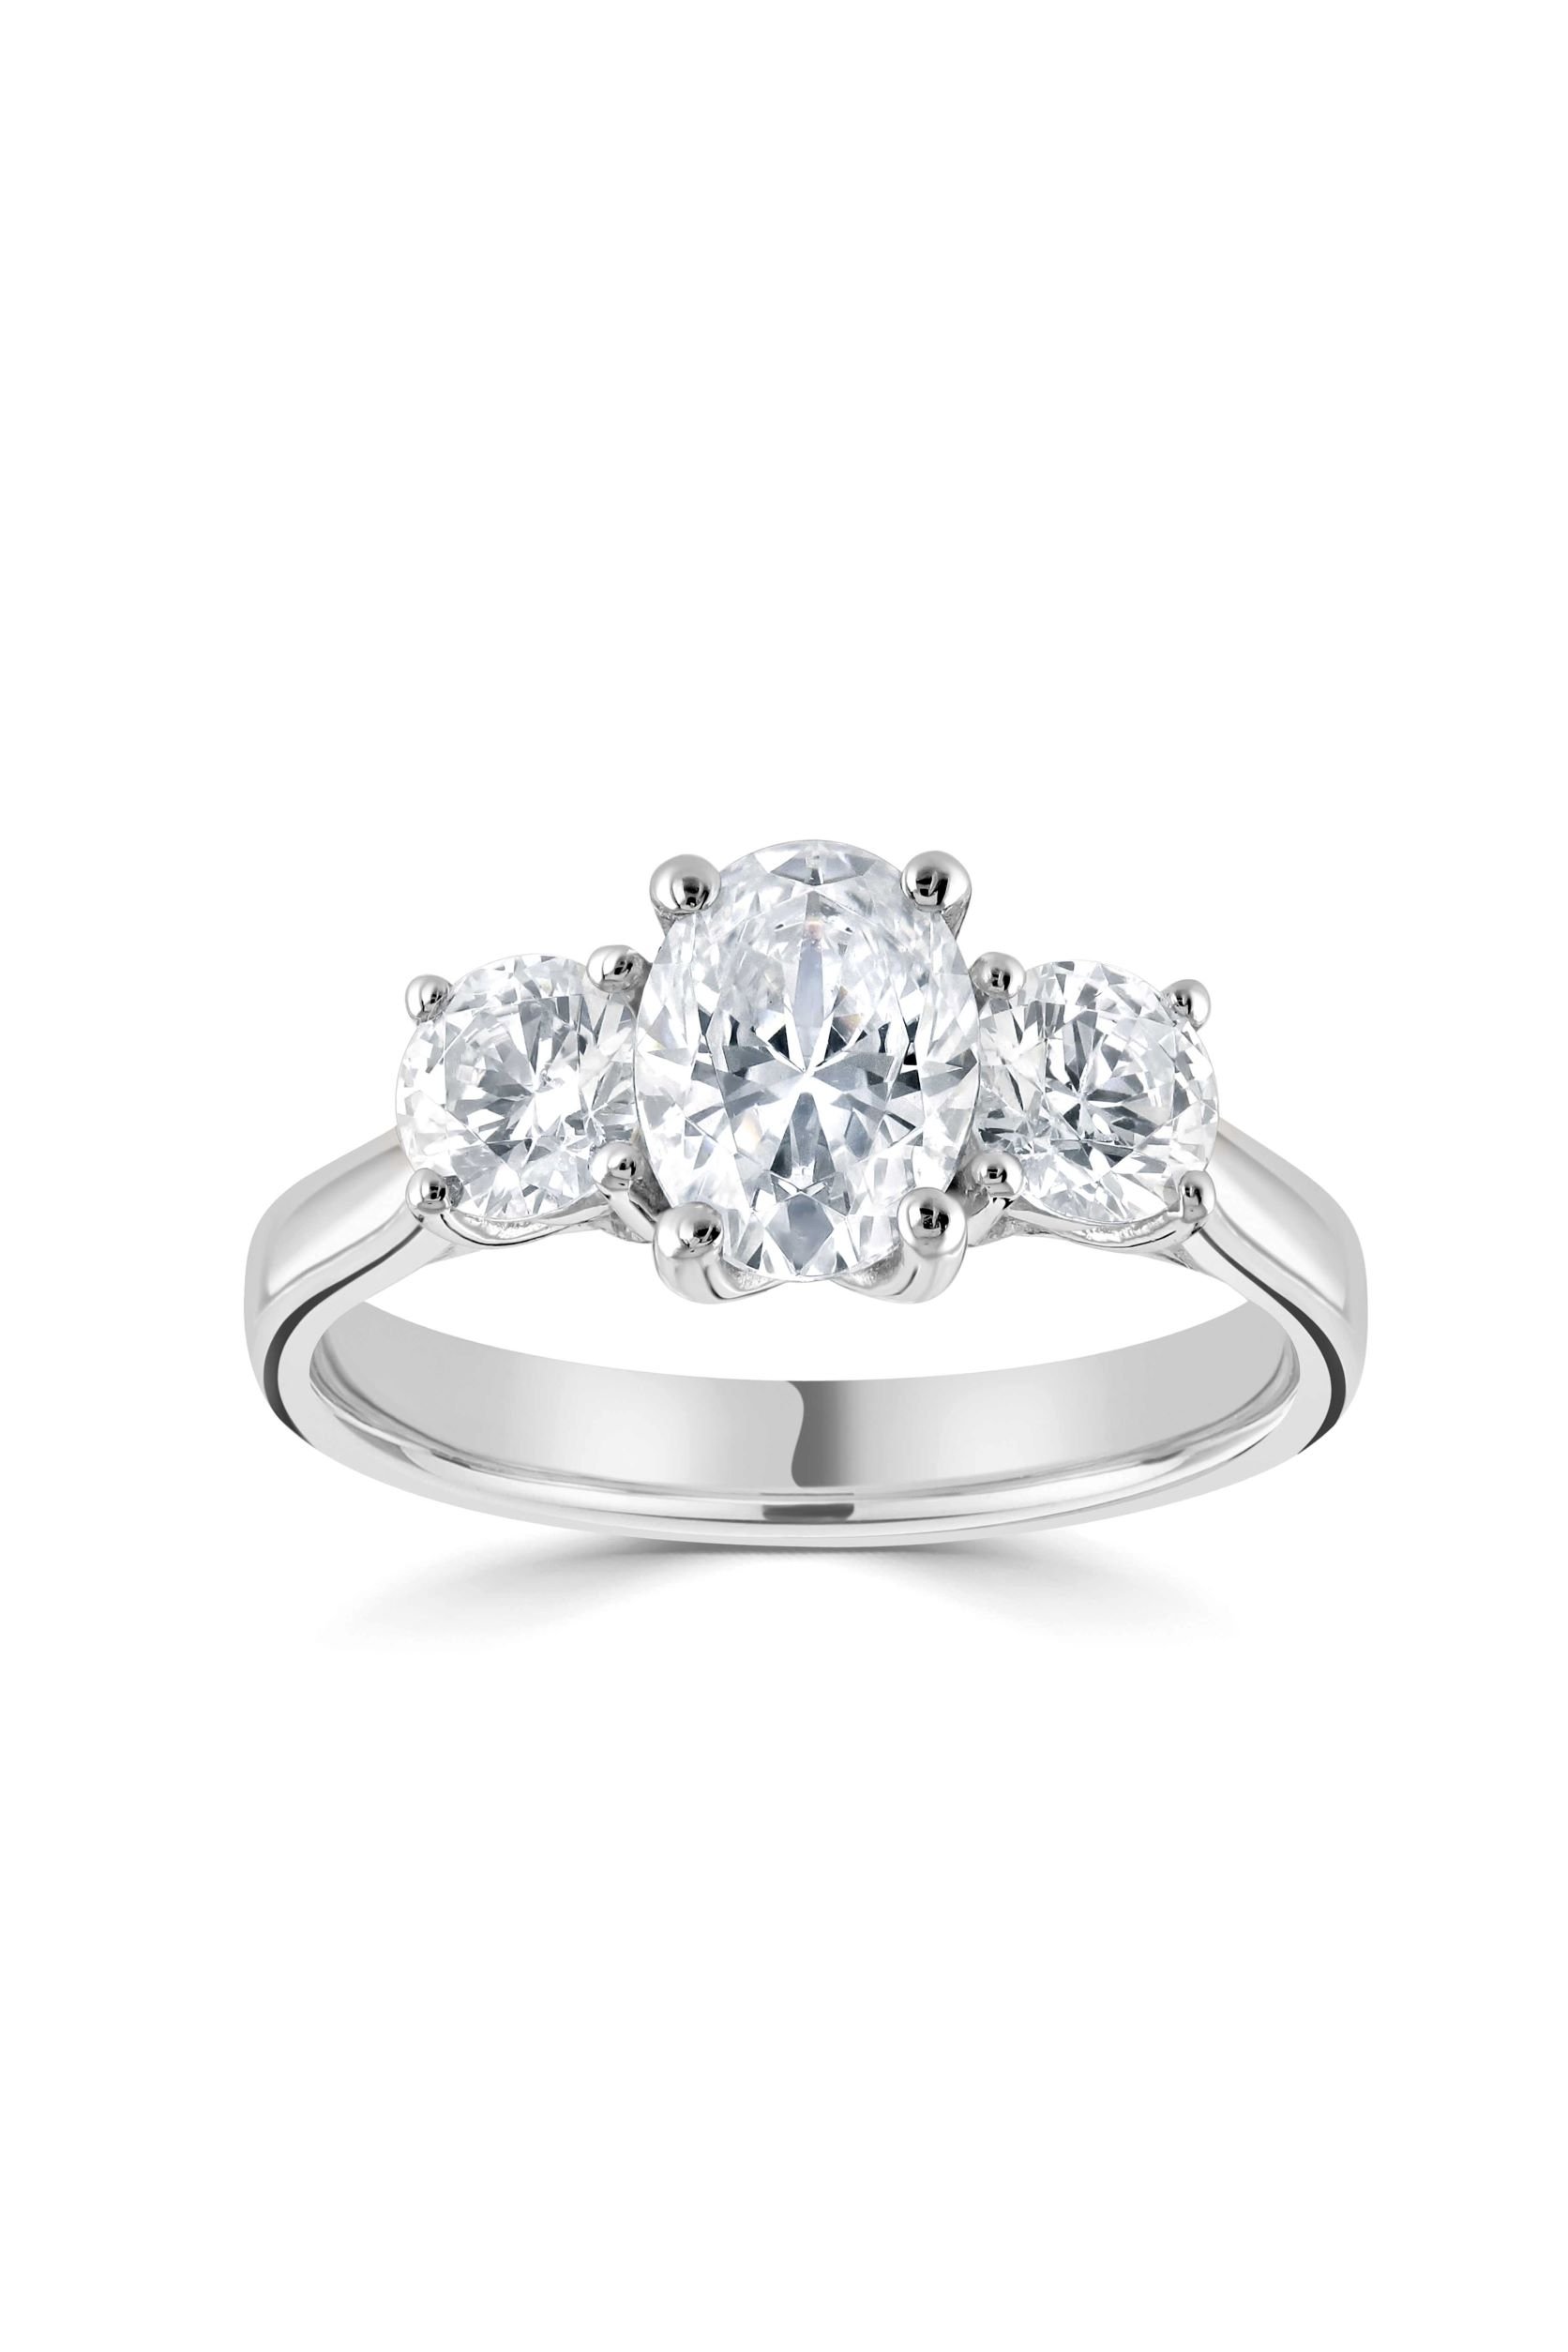 Platinum Round Brilliant 3 Stone with Pears Engagement Ring - PRS0645 -  Steven Stone